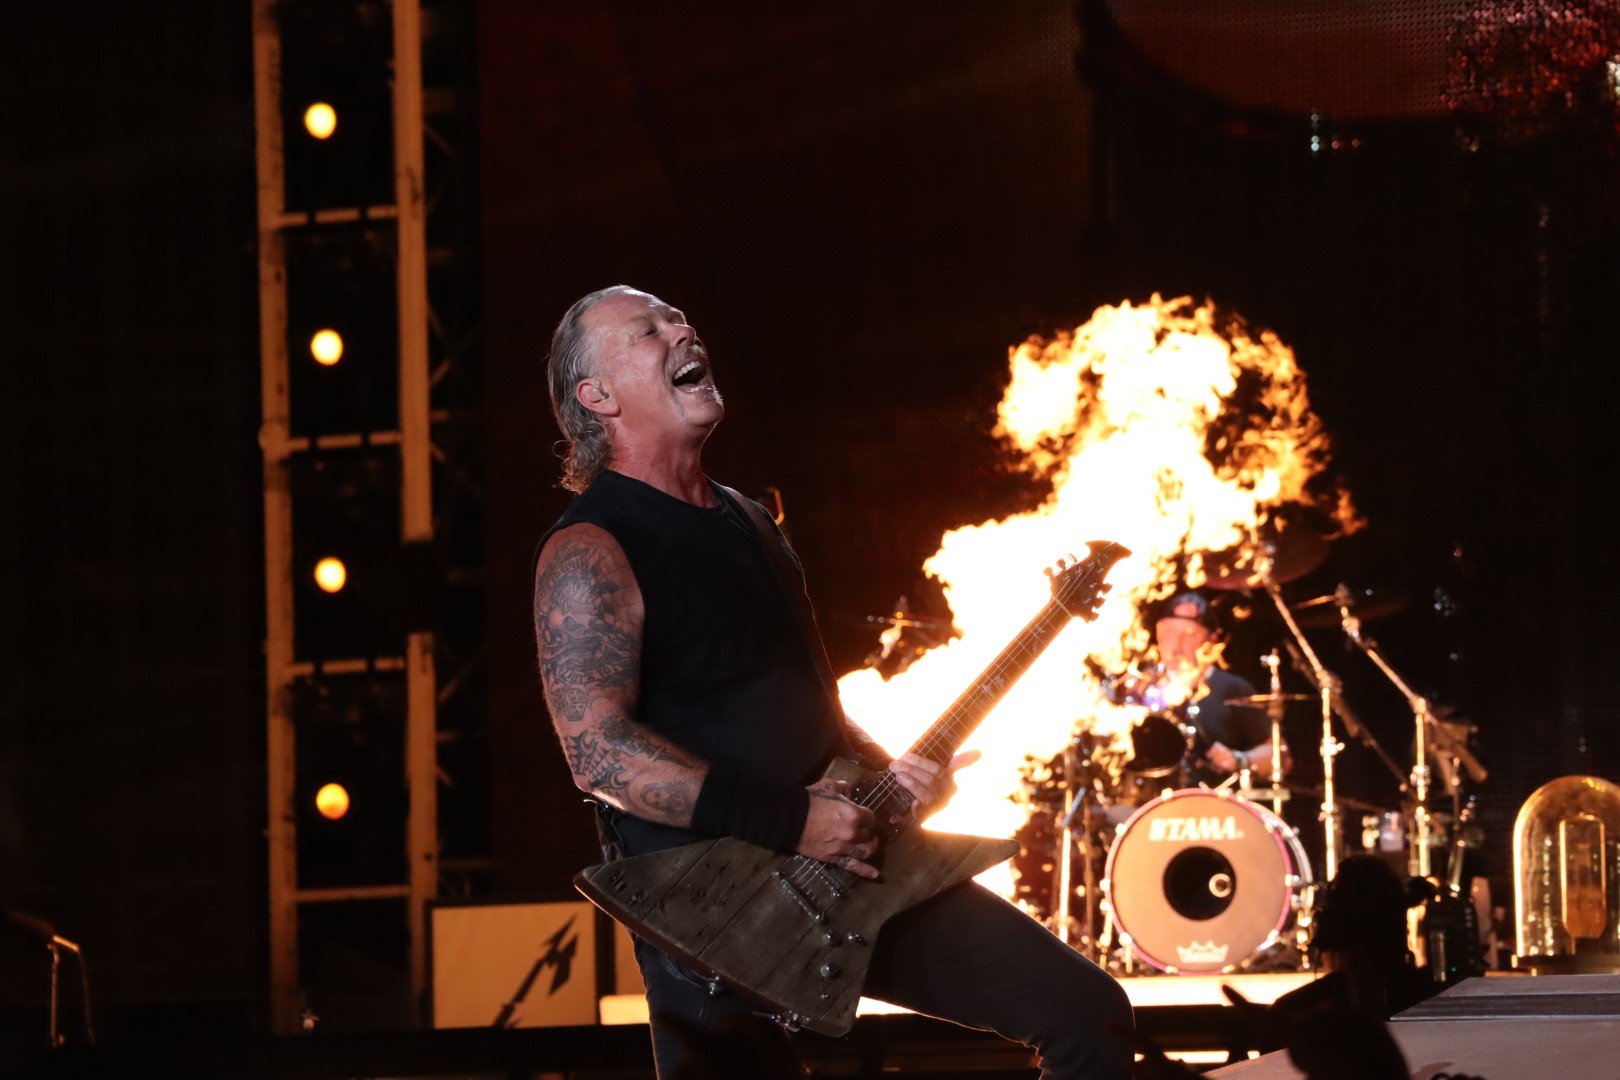 Metallica at Arena Nationala in Bucharest on August 14, 2019 (d5525a054a)